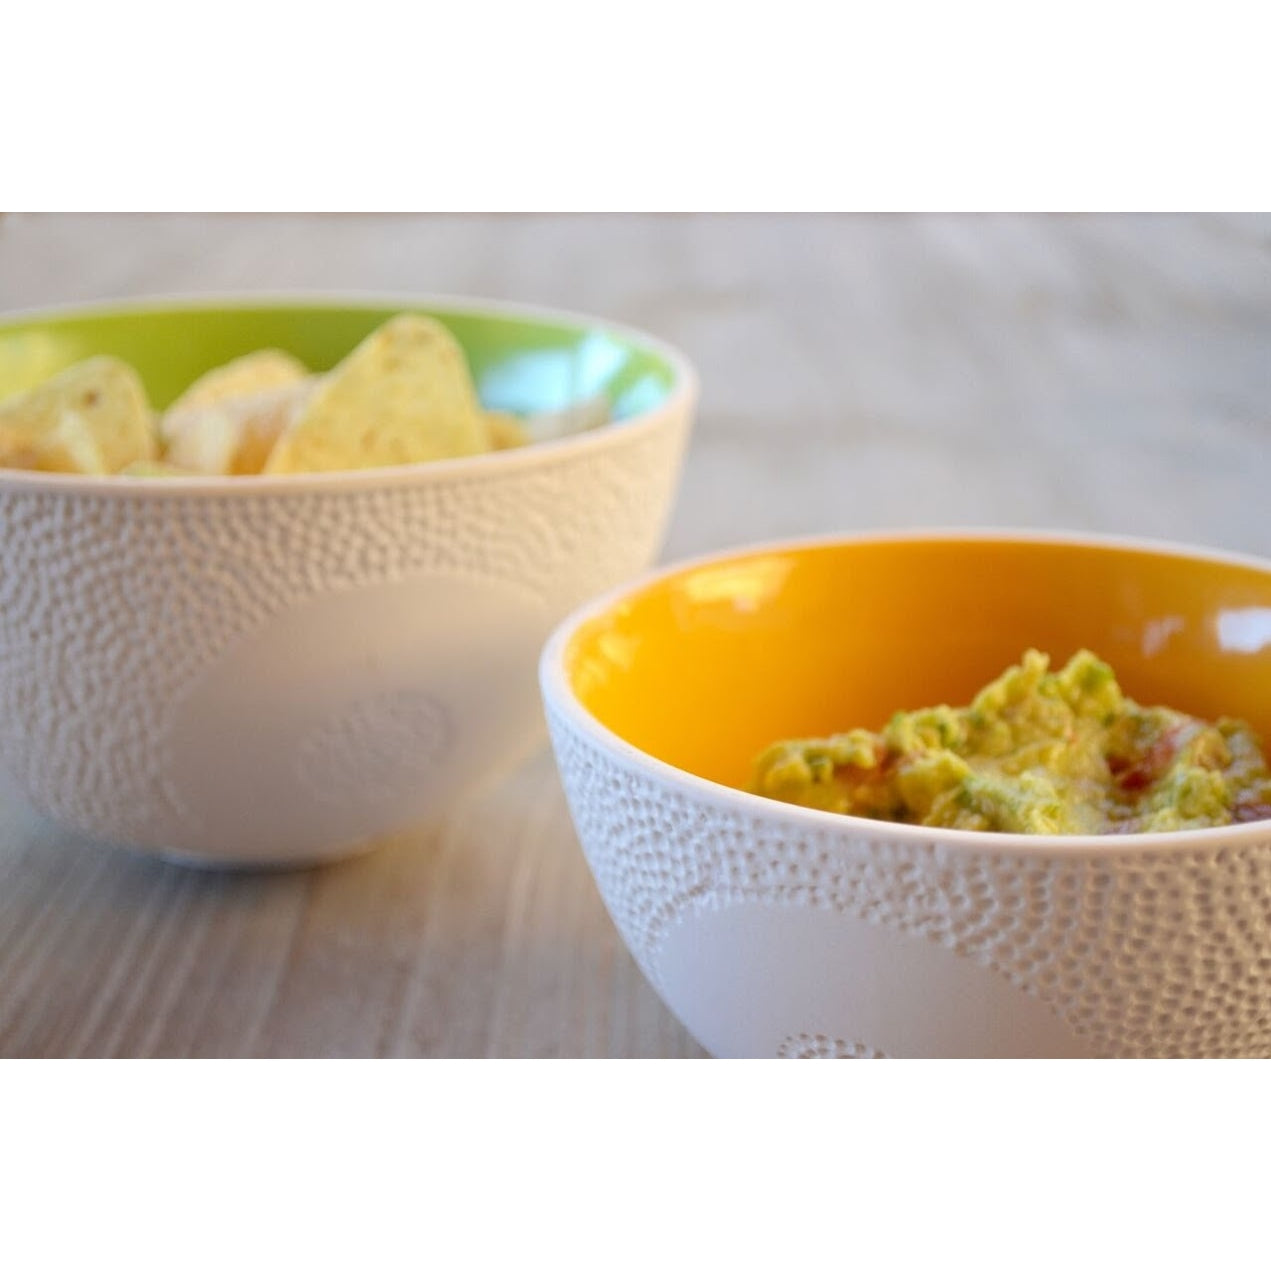 Maia Ming Textured Nesting Bowls, Set of 3